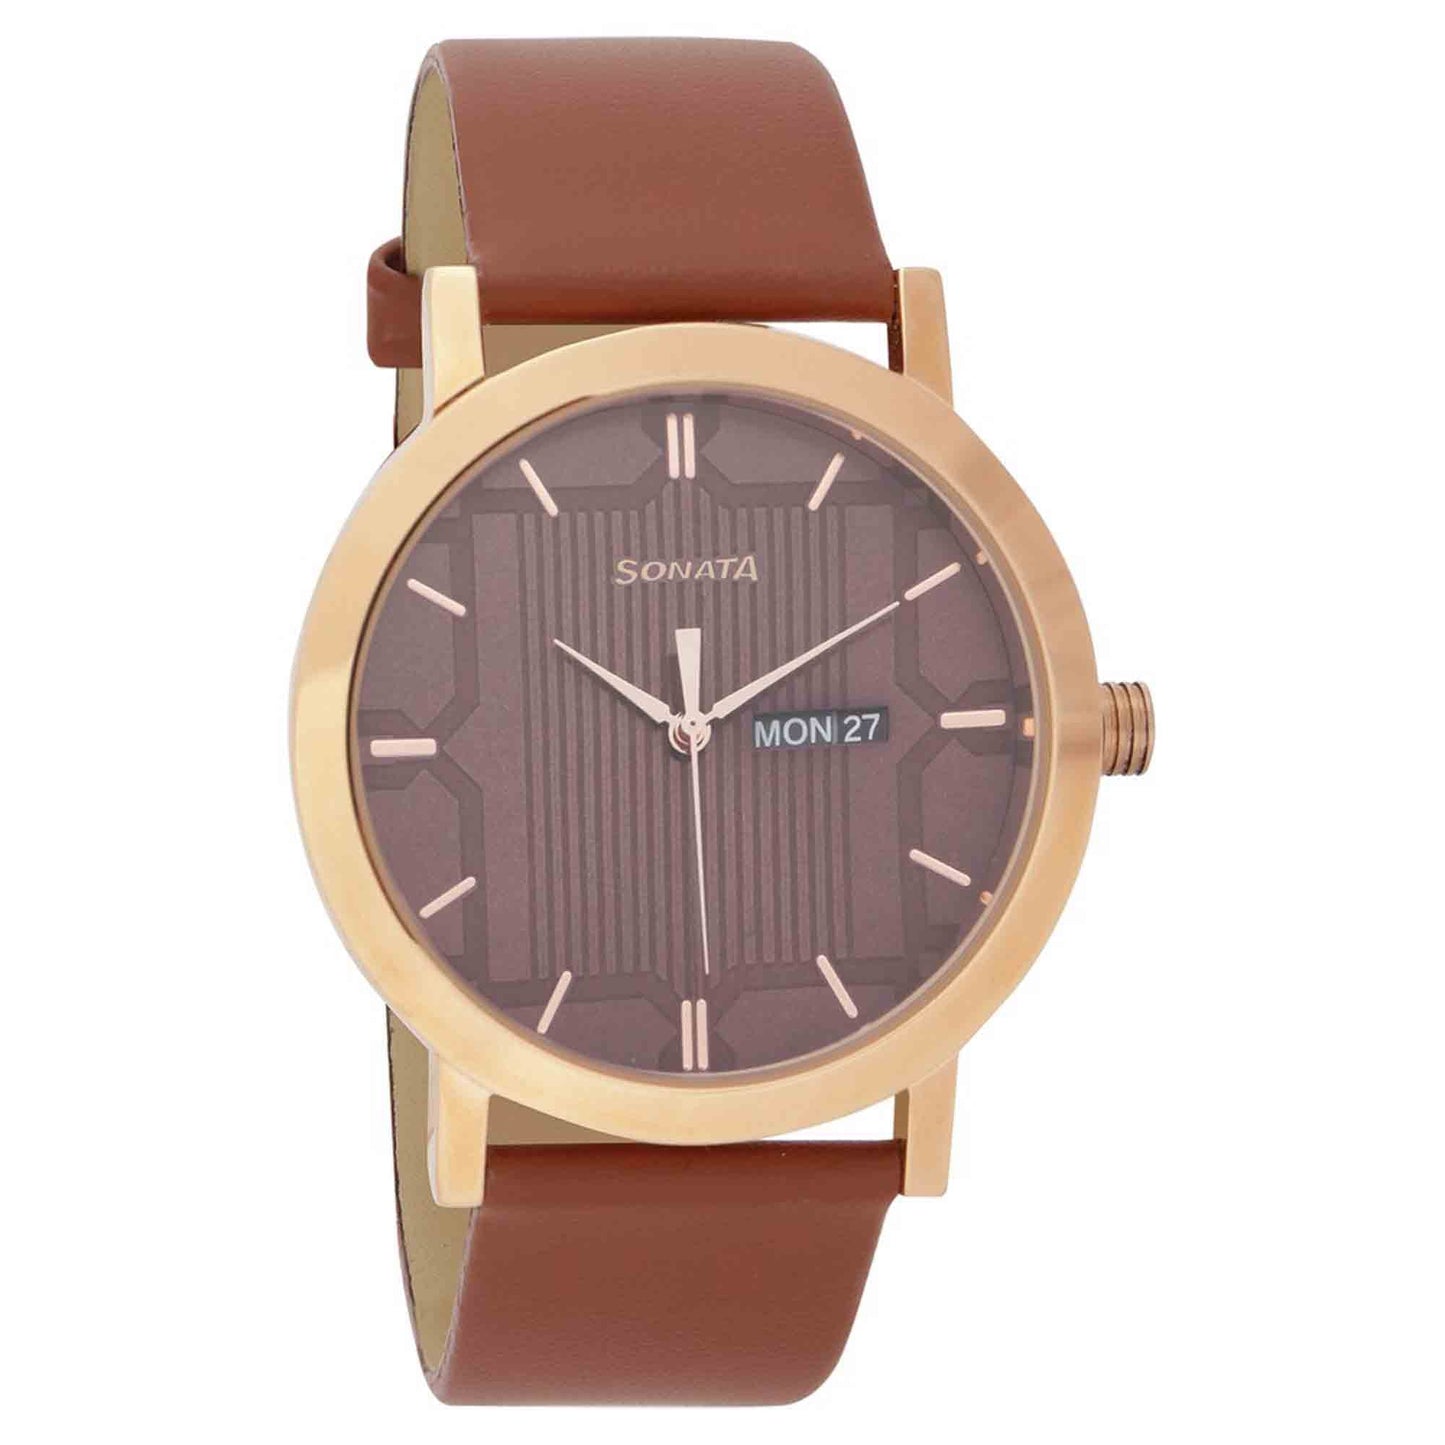 Sonata Quartz Analog with Day and Date Brown Dial Leather Strap Watch for Men